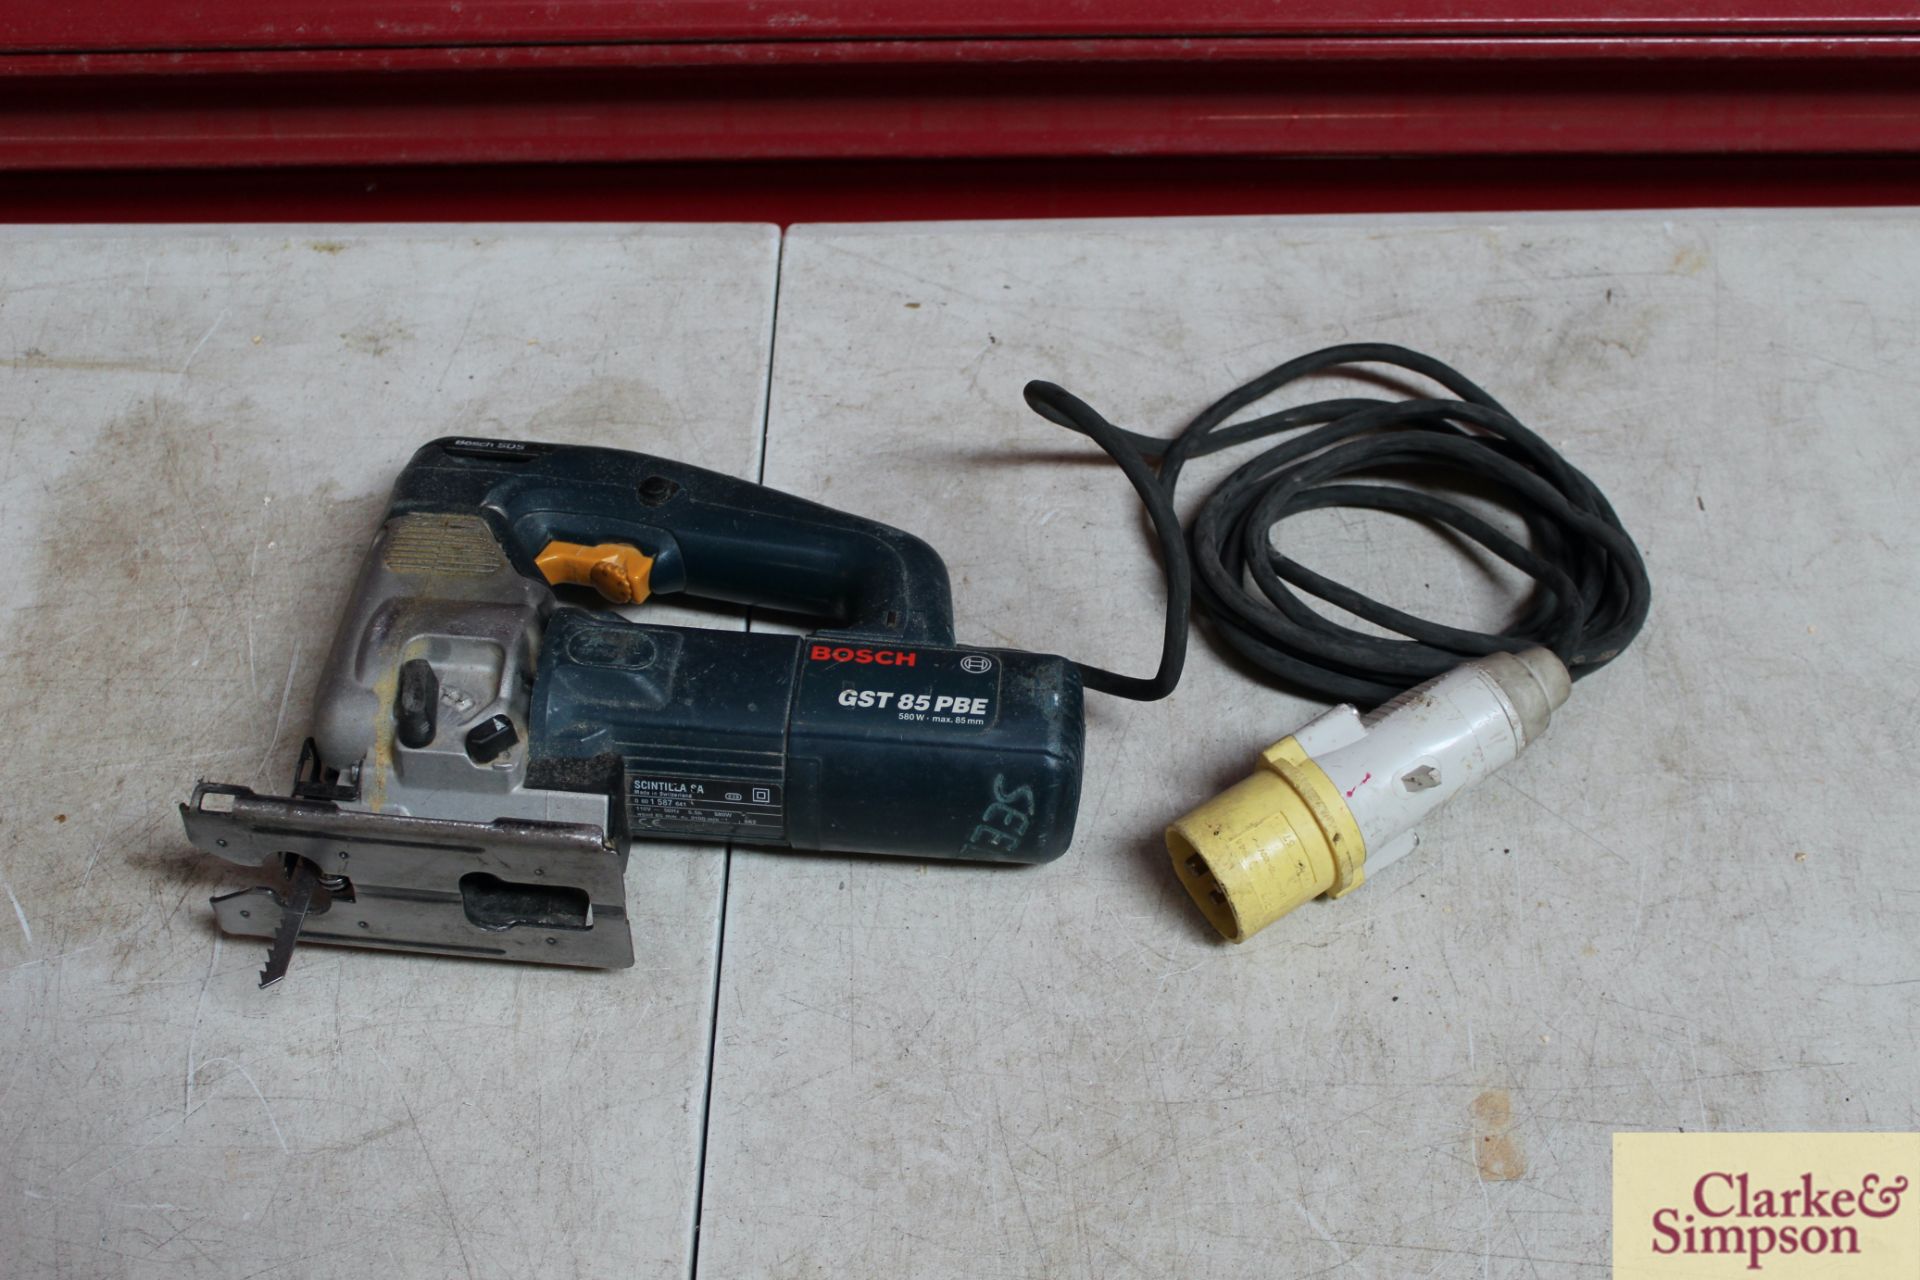 Bosch GST 85 PBE 110V jig saw in case, with large quantity of blades. - Image 3 of 4